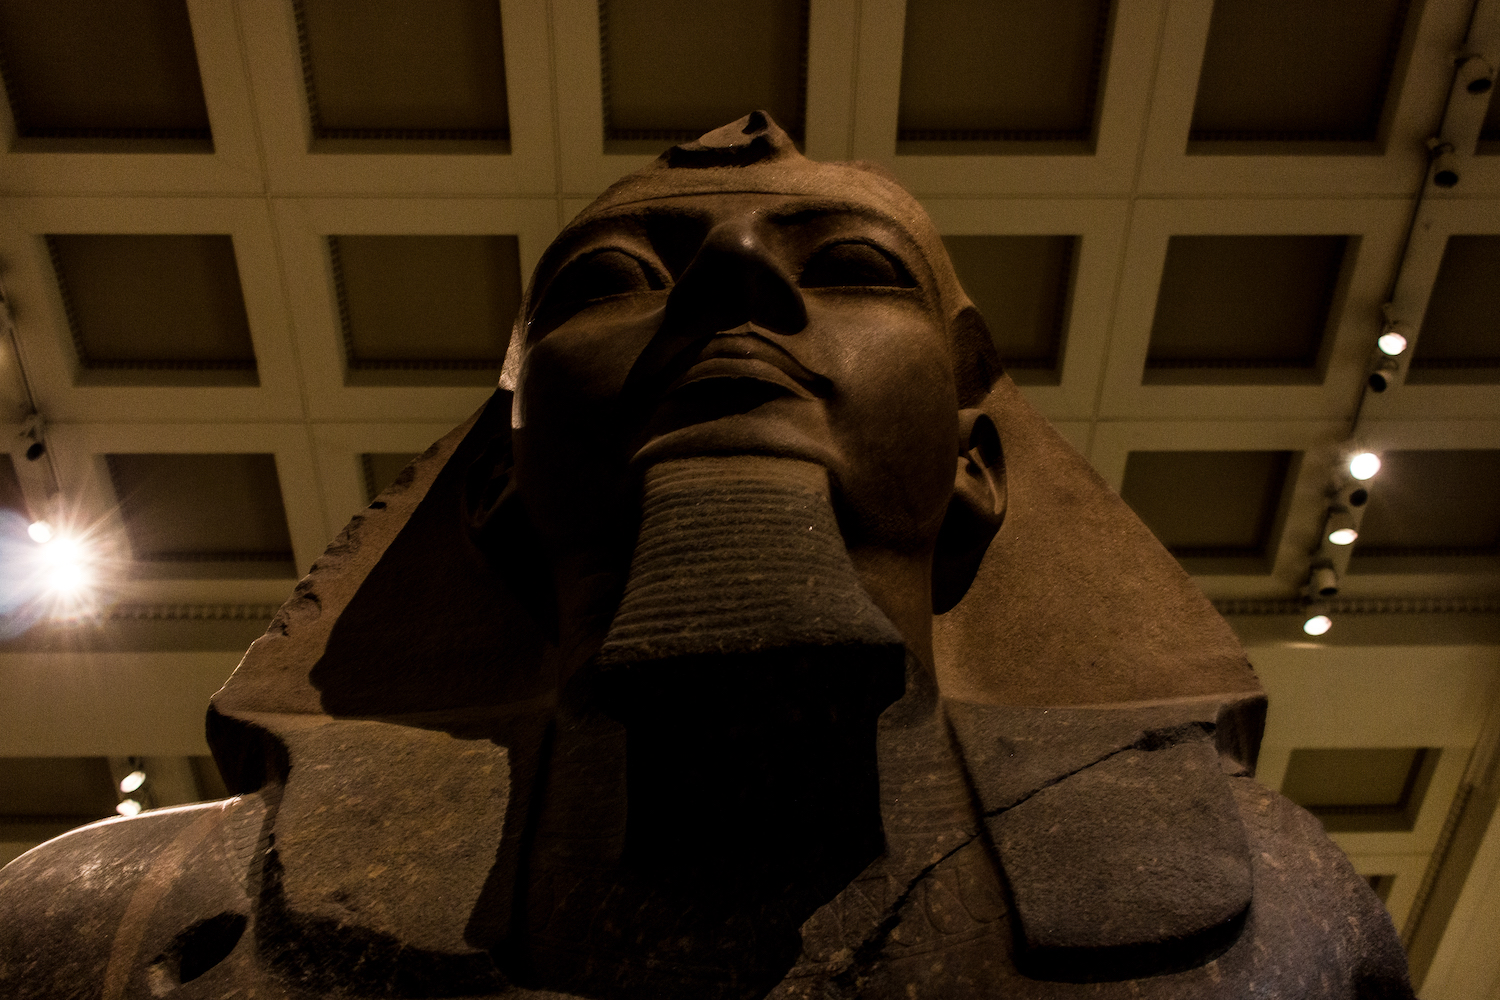 Professional Photography Stone Sculpture From Kemet Egypt Close-Up Of King Ramses II In British Museum London